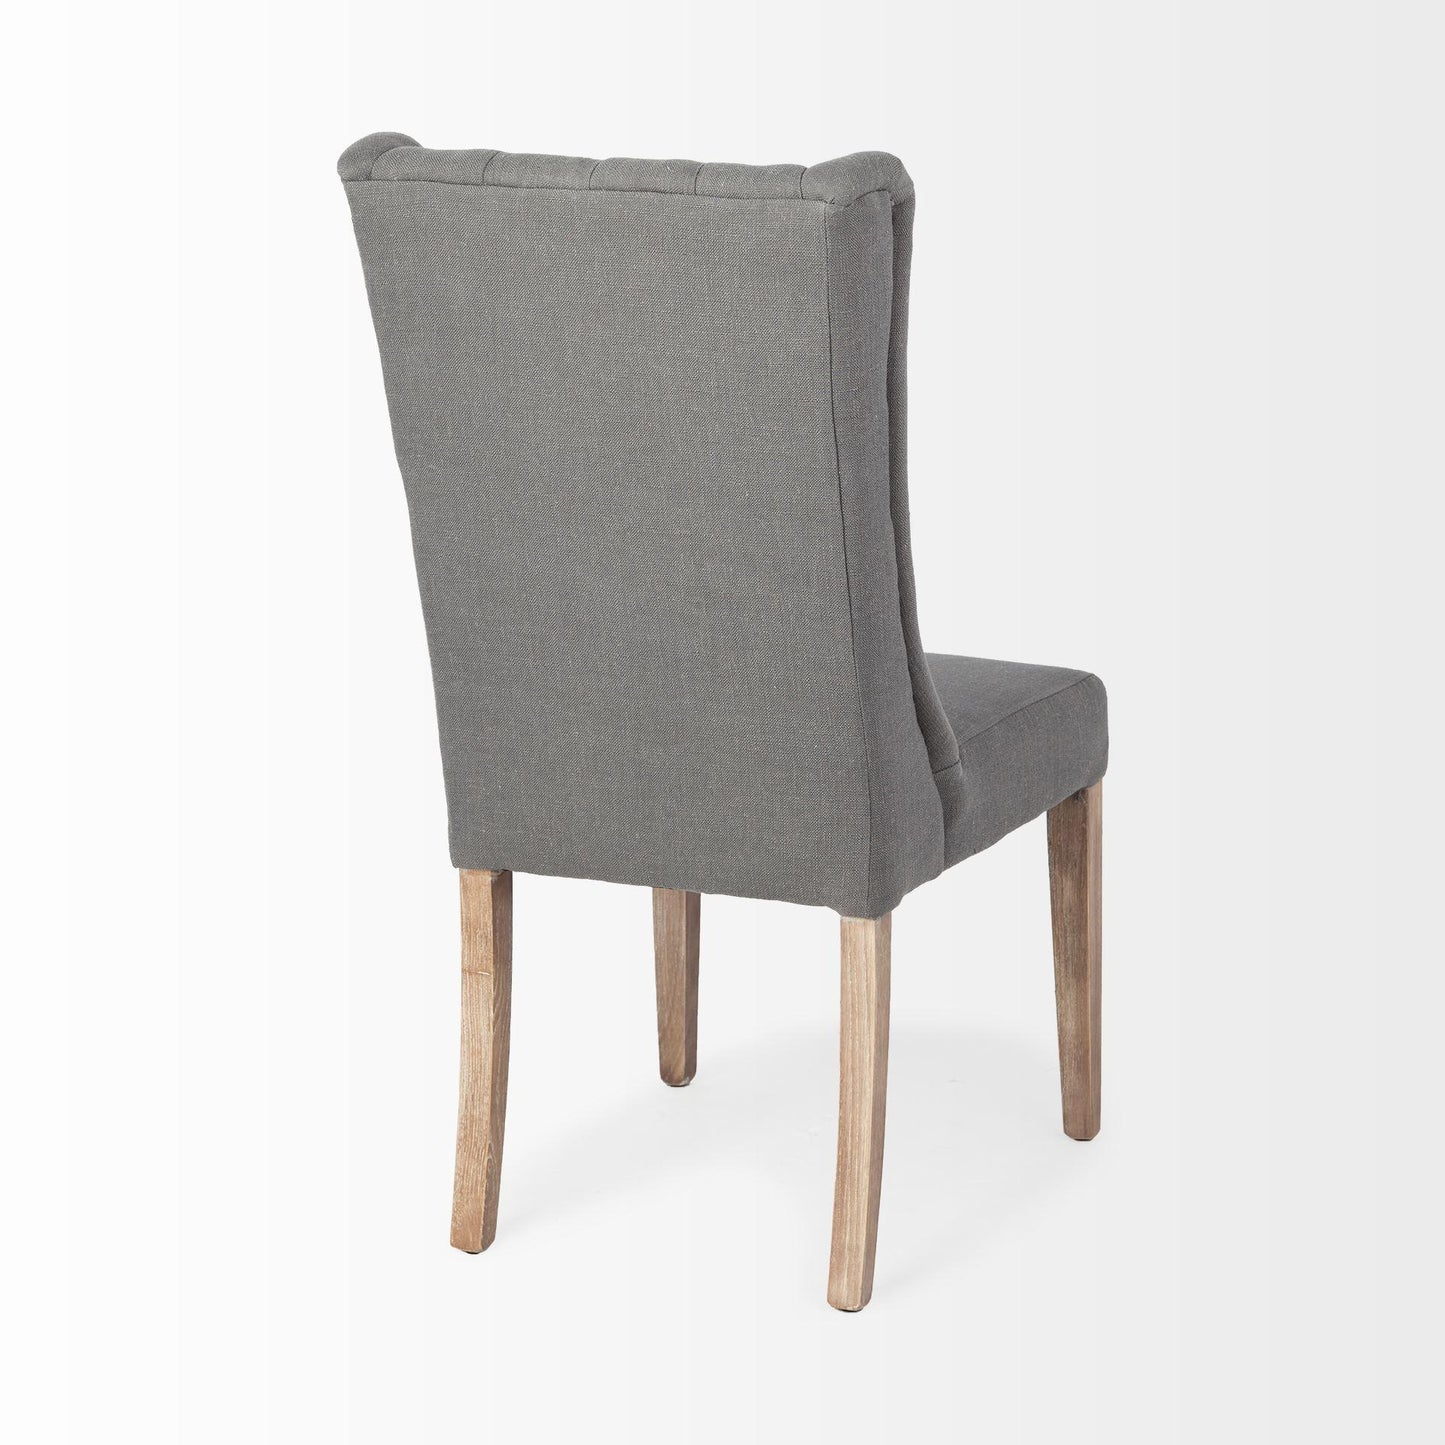 Mackenzie II Gray Plush Linen Covering Ash Solid Wood Base Dining Chair